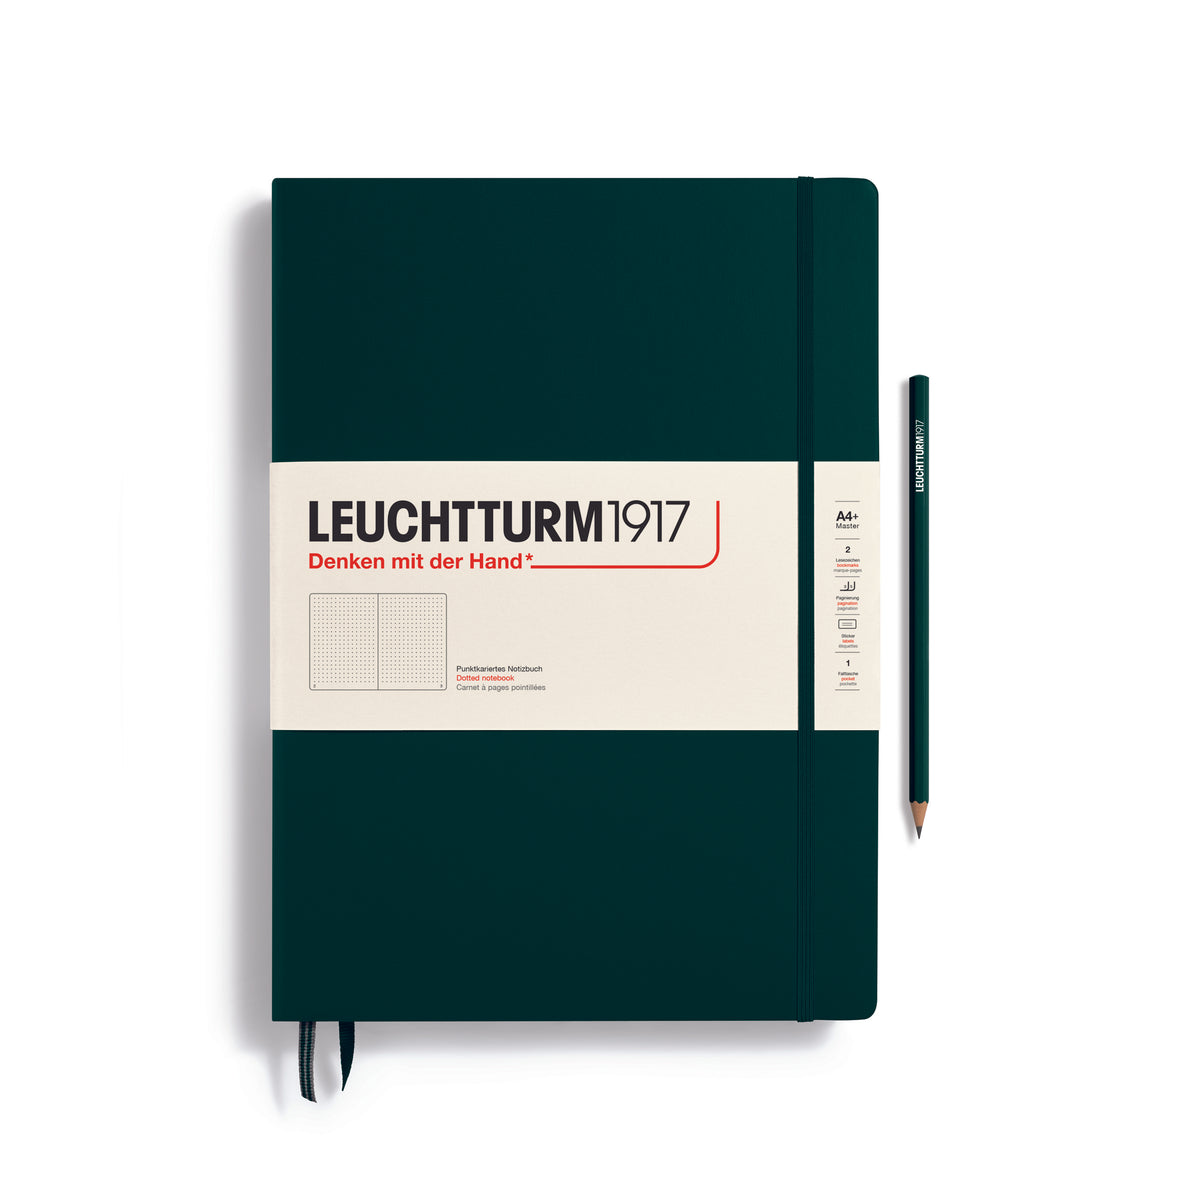 A large forest green notebook with a white paper band around it with the logo of the brand Leuchtturm1917. Below this is an image of the page ruling inside - in this case, dotted. It has two page marker ribbons showing at the bottom near the binding and a matching colour elastic notebook closure holding it neatly together. A forest green Leuchtturm pencil is shown at the side of the book.